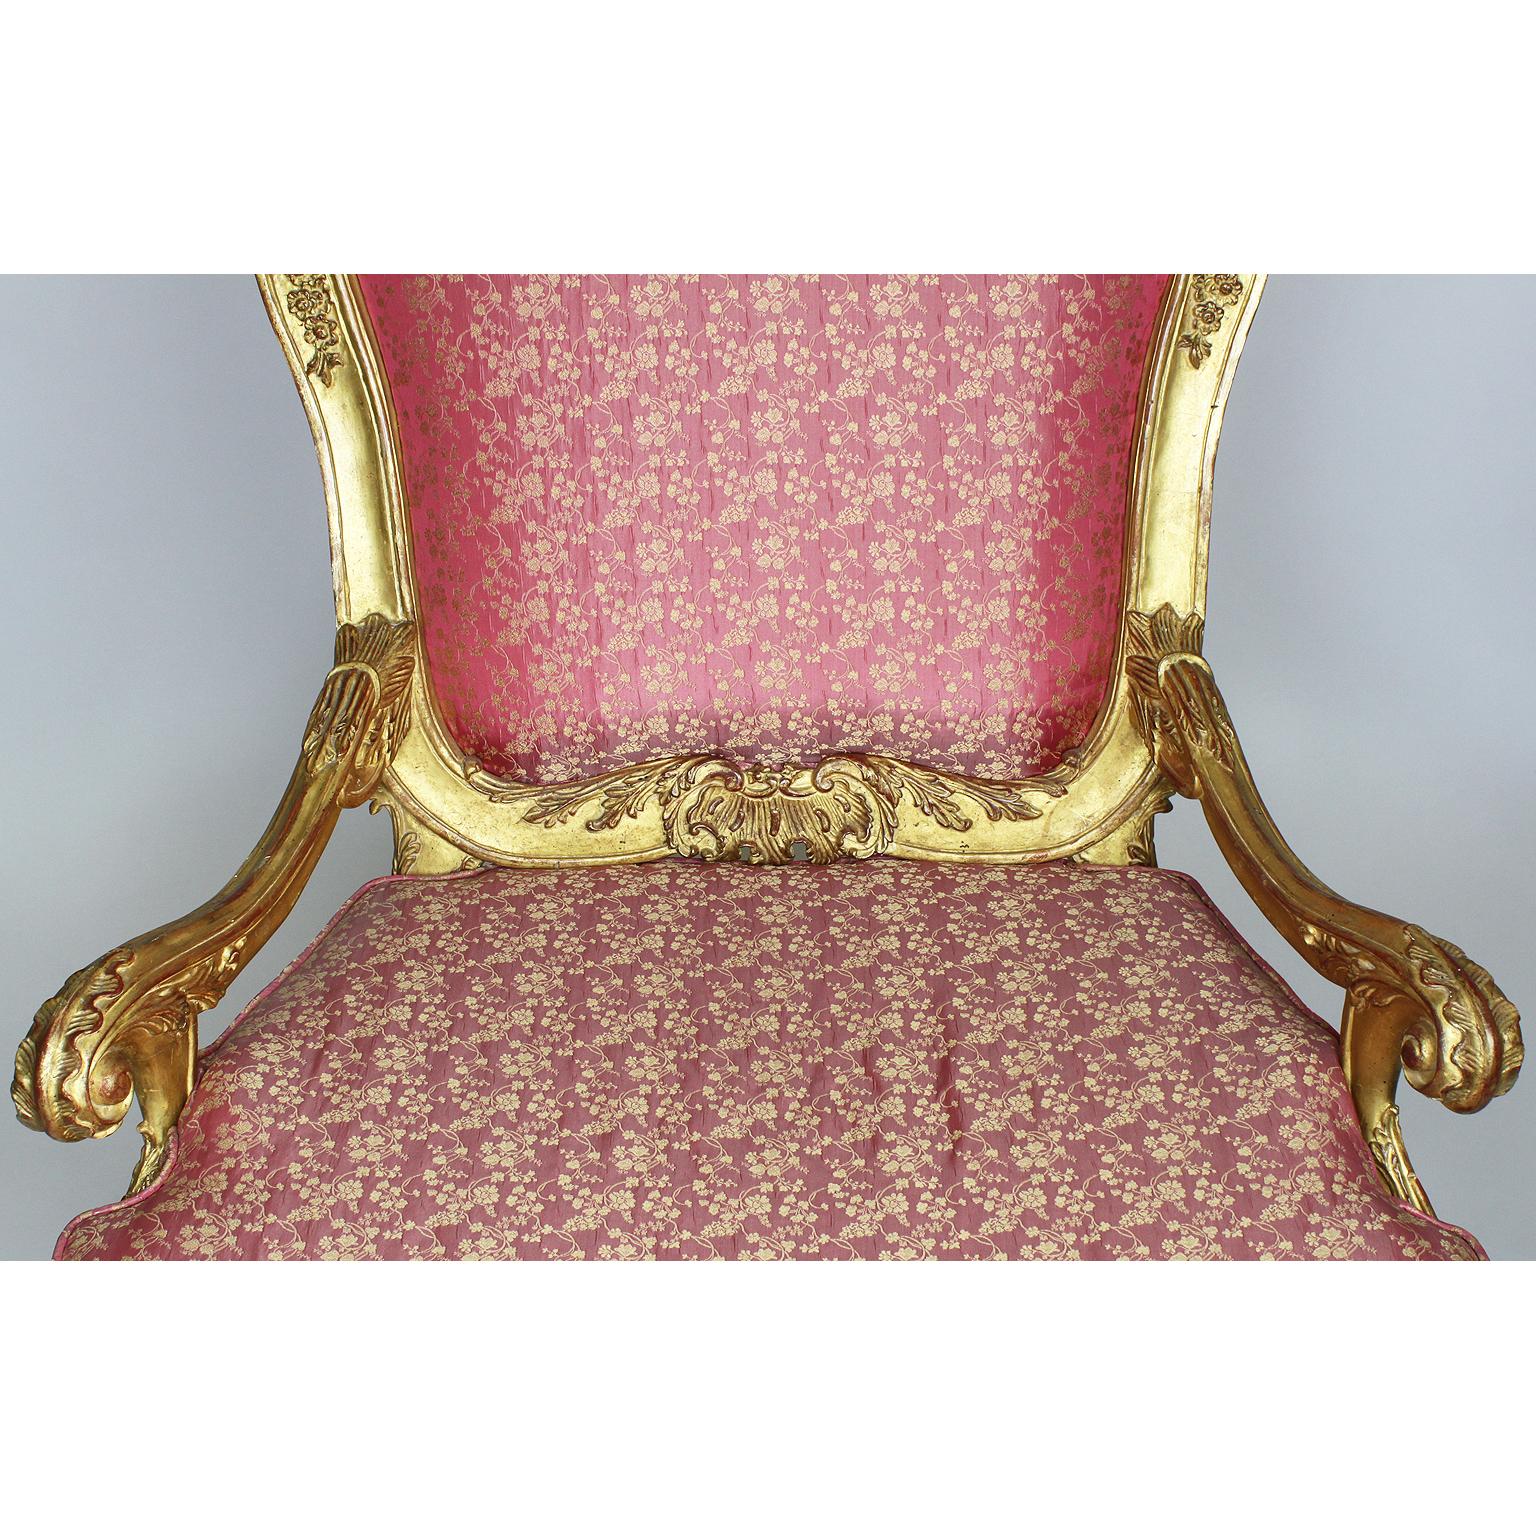 Pair of Italian Venetian Rococo Revival Style Giltwood Carved Throne Armchairs For Sale 2